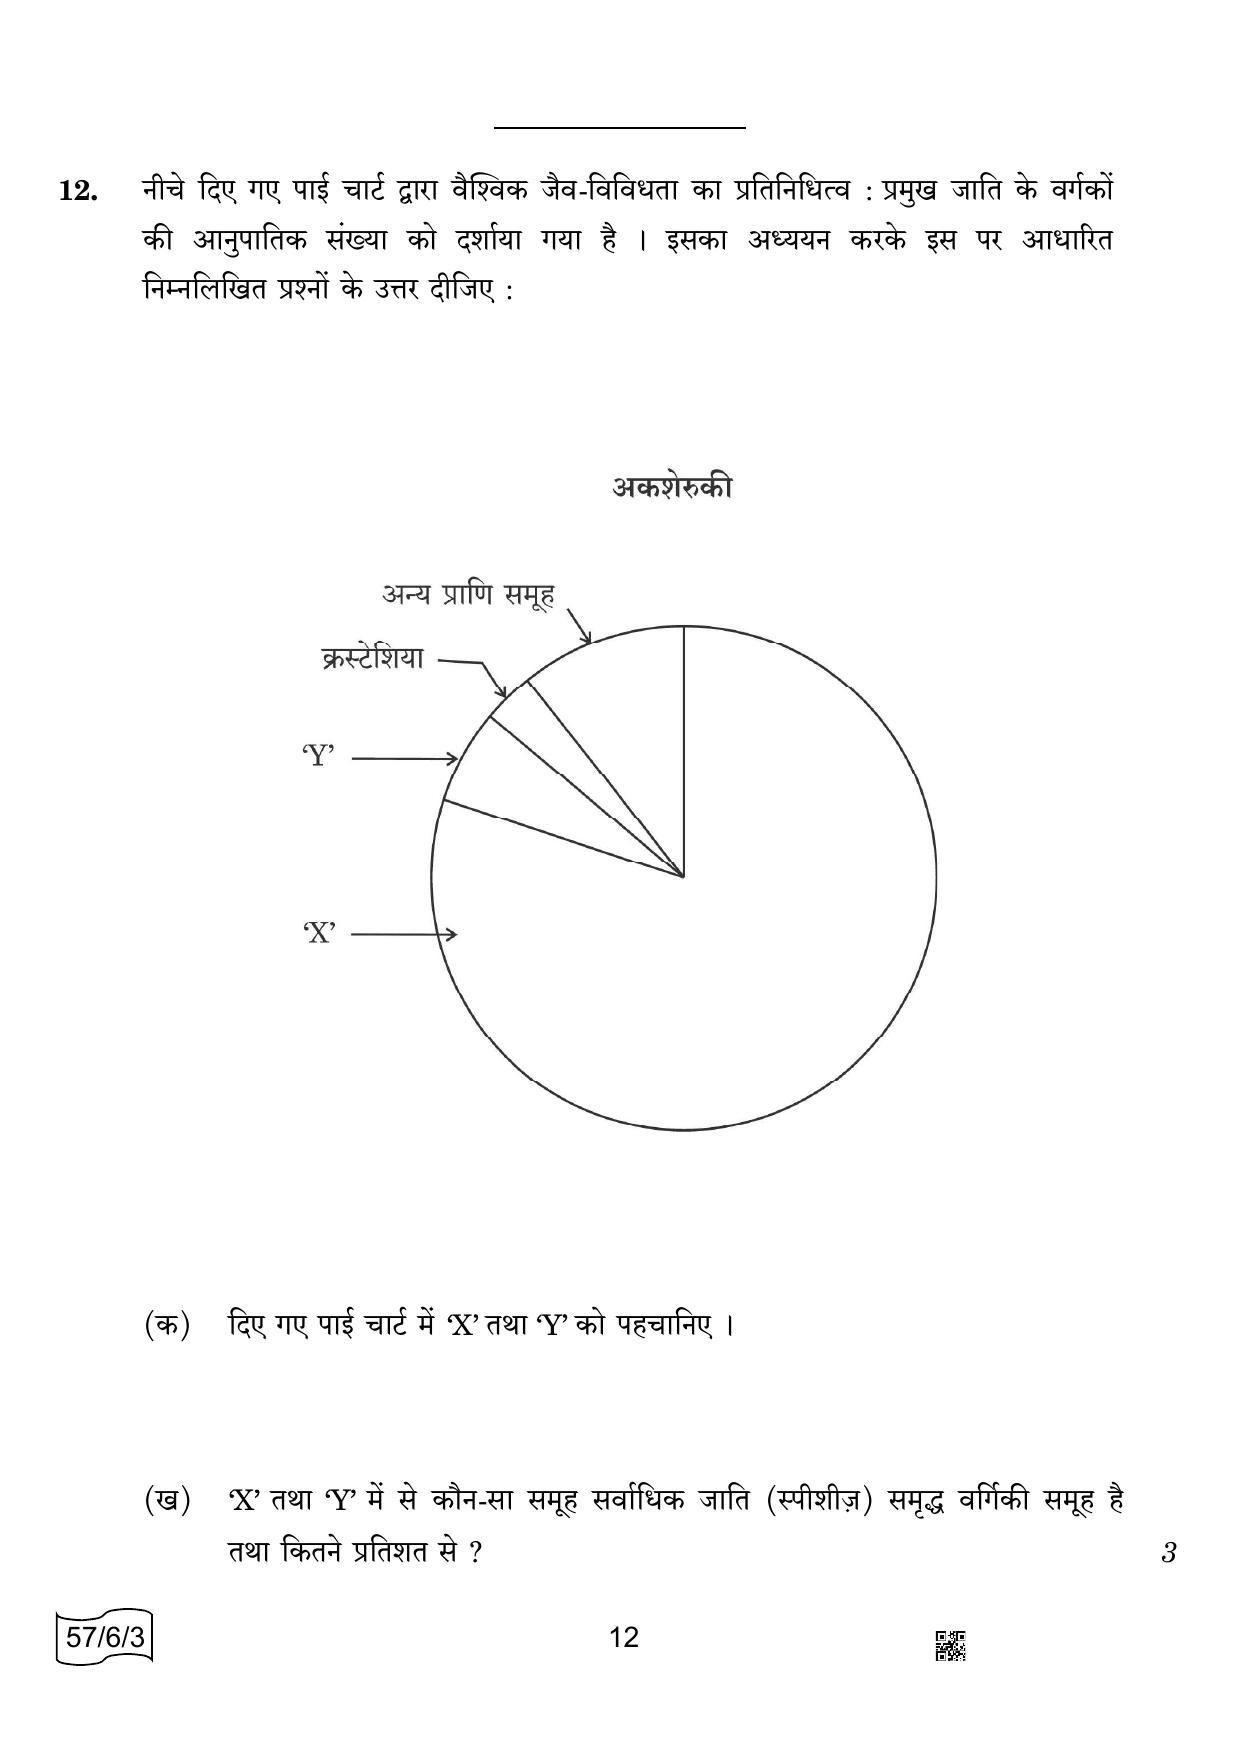 CBSE Class 12 57-6-3 BIOLOGY 2022 Compartment Question Paper - Page 12